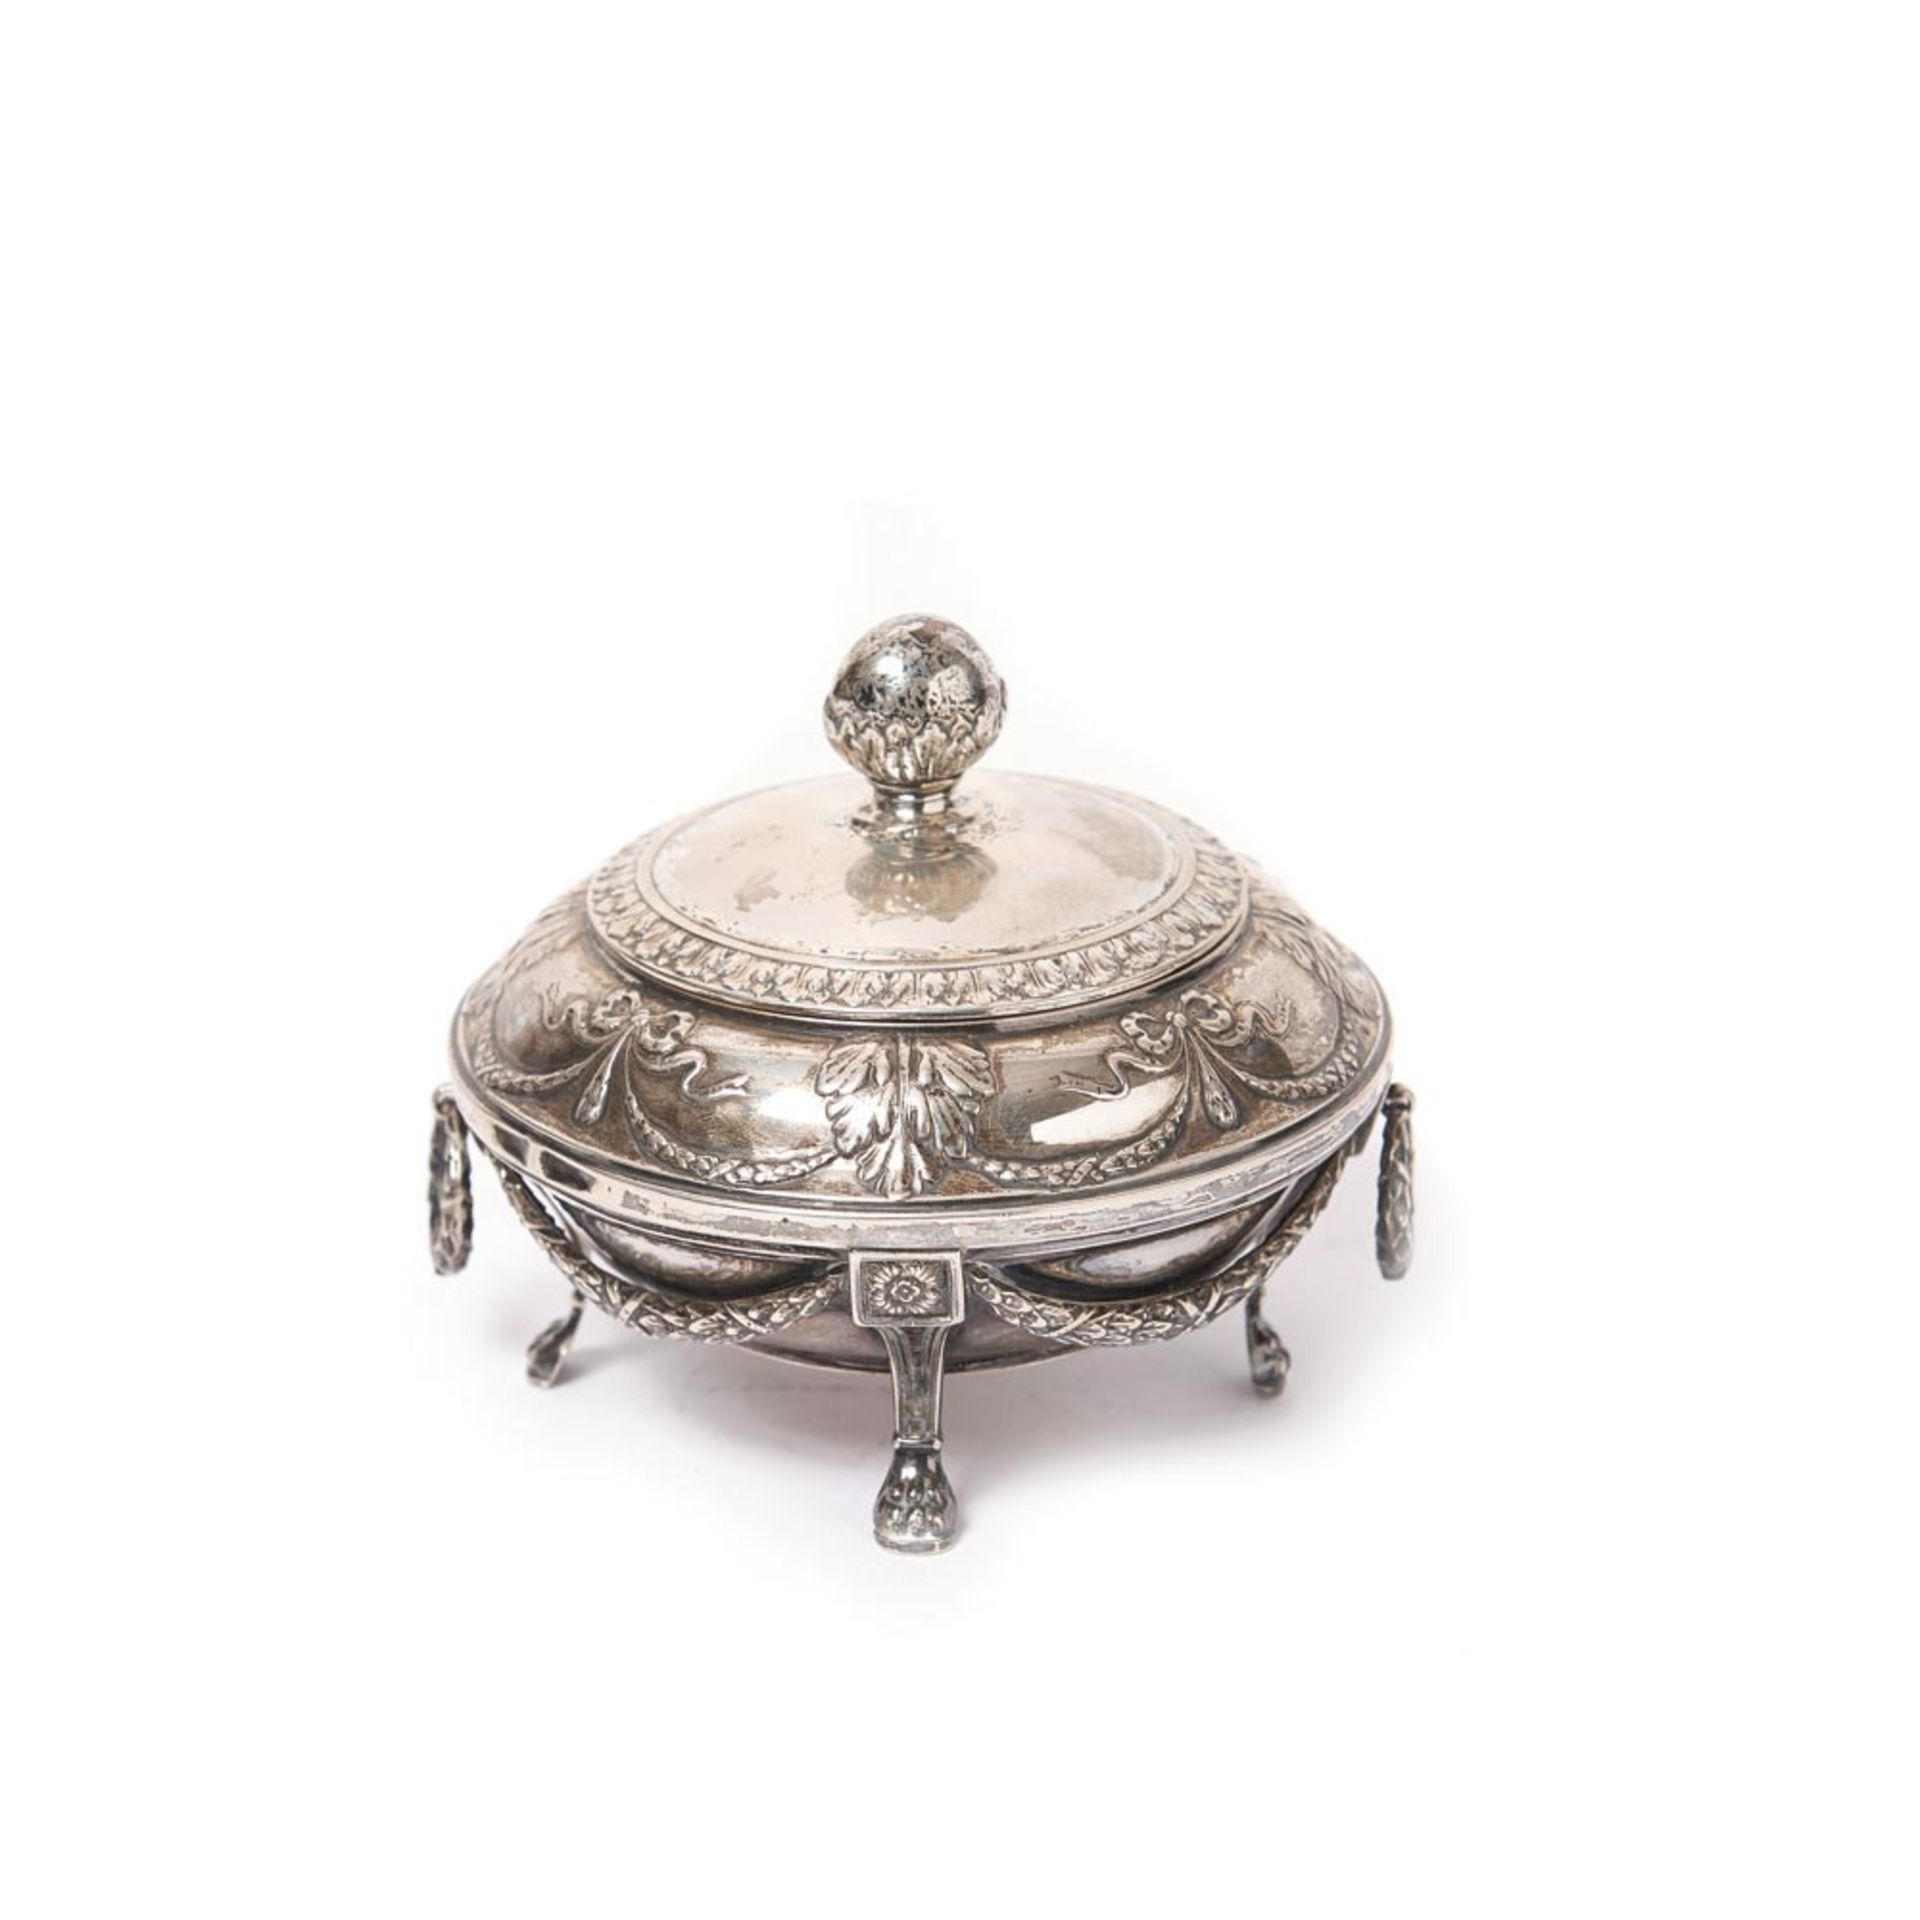 Silver Neoclassical style sugar bowl, early 20th century